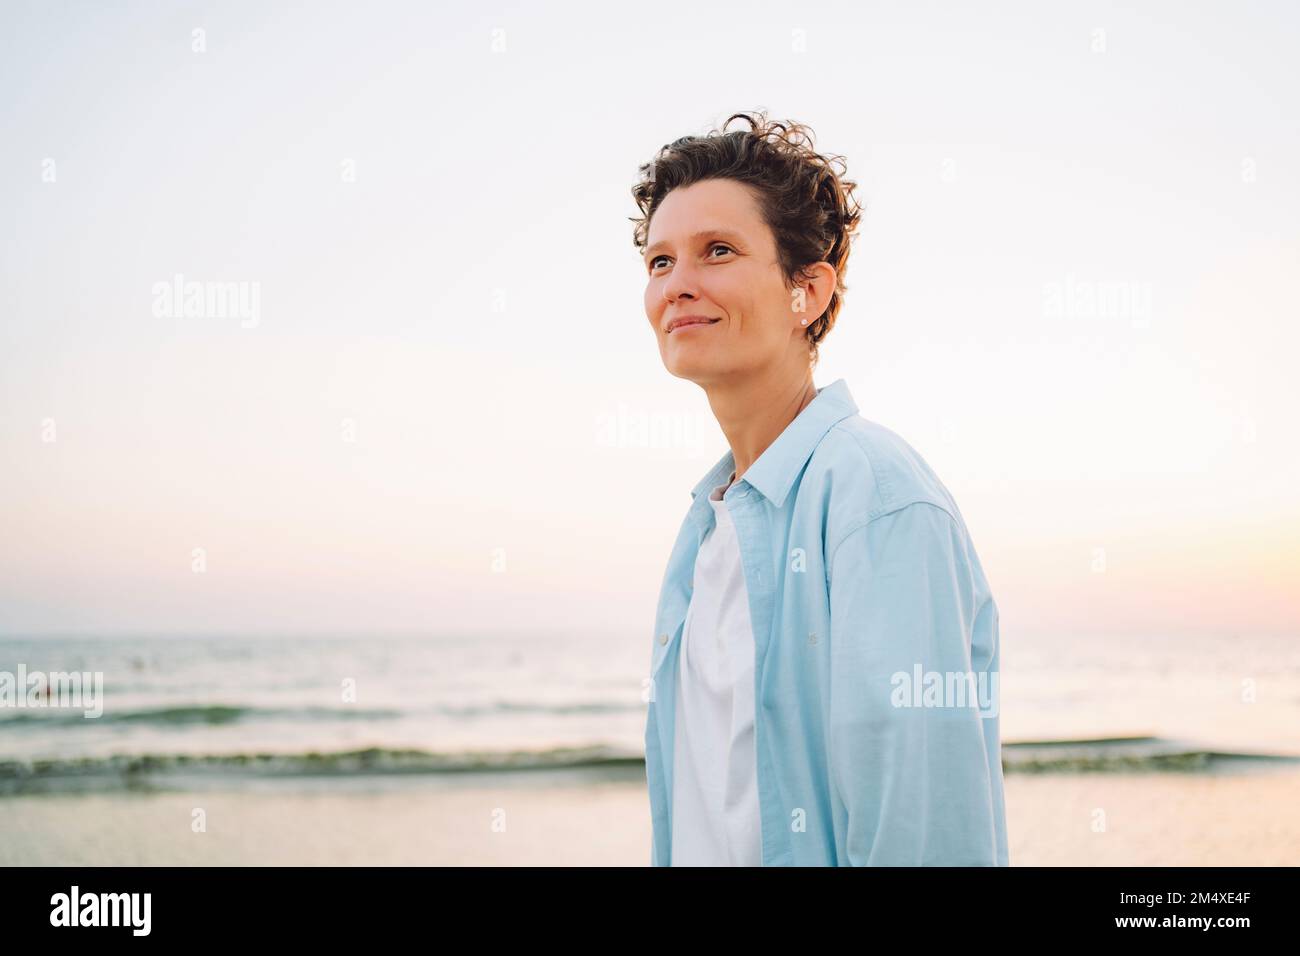 Thoughtful androgynous woman standing at beach Stock Photo